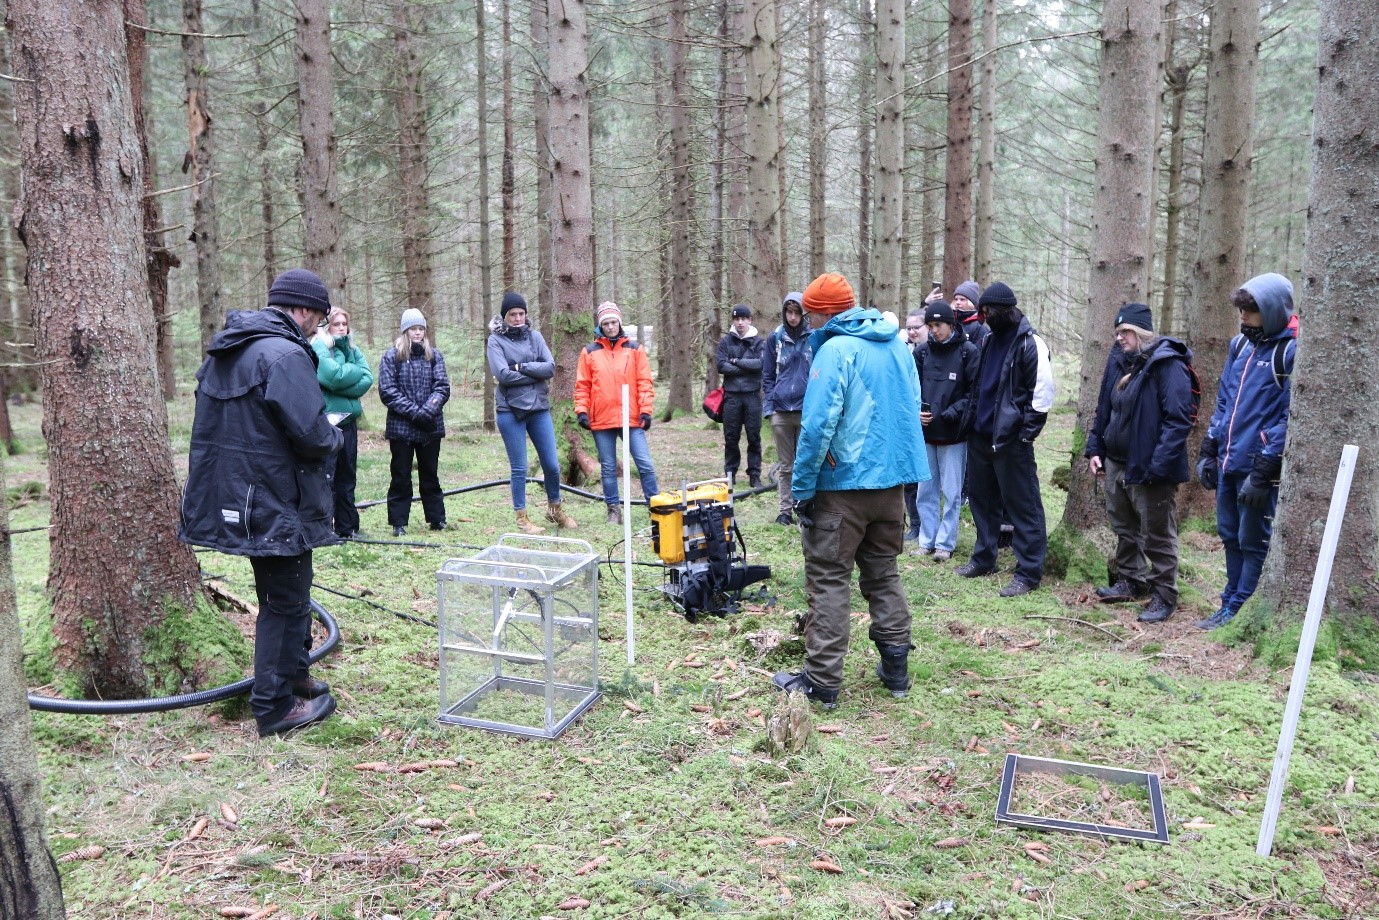 Researchers demonstrate how chambers are used to measure soil respiration. Photo by: Leif Klemedtsson